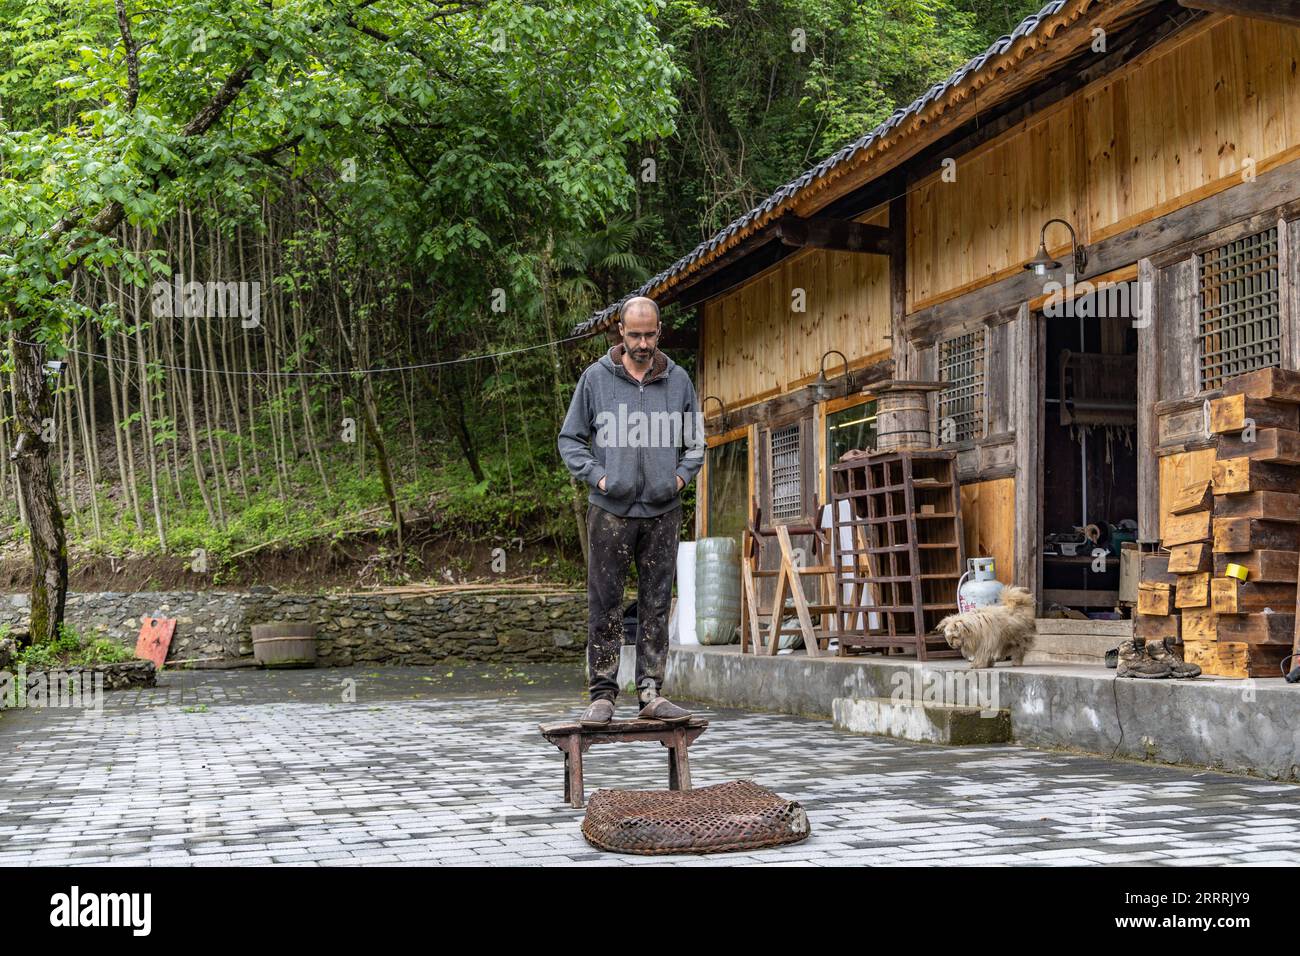 230531 -- CHONGQING, May 31, 2023 -- Vincent Cazeneuve is pictured outside his studio in Songbai Village of Beiping Town, Chengkou County, southwest China s Chongqing Municipality, May 29, 2023. Vincent Cazeneuve s studio, a two-story wooden house surrounded by lacquer trees, is located deep in the Daba Mountains in Beiping Town of Chengkou County, southwest China s Chongqing Municipality. Fascinated by lacquer art, the French artist came to China 15 years ago with the aim of finding the suitable species of lacquer tree to make lacquer artworks. He had visited many places in China, and finally Stock Photo